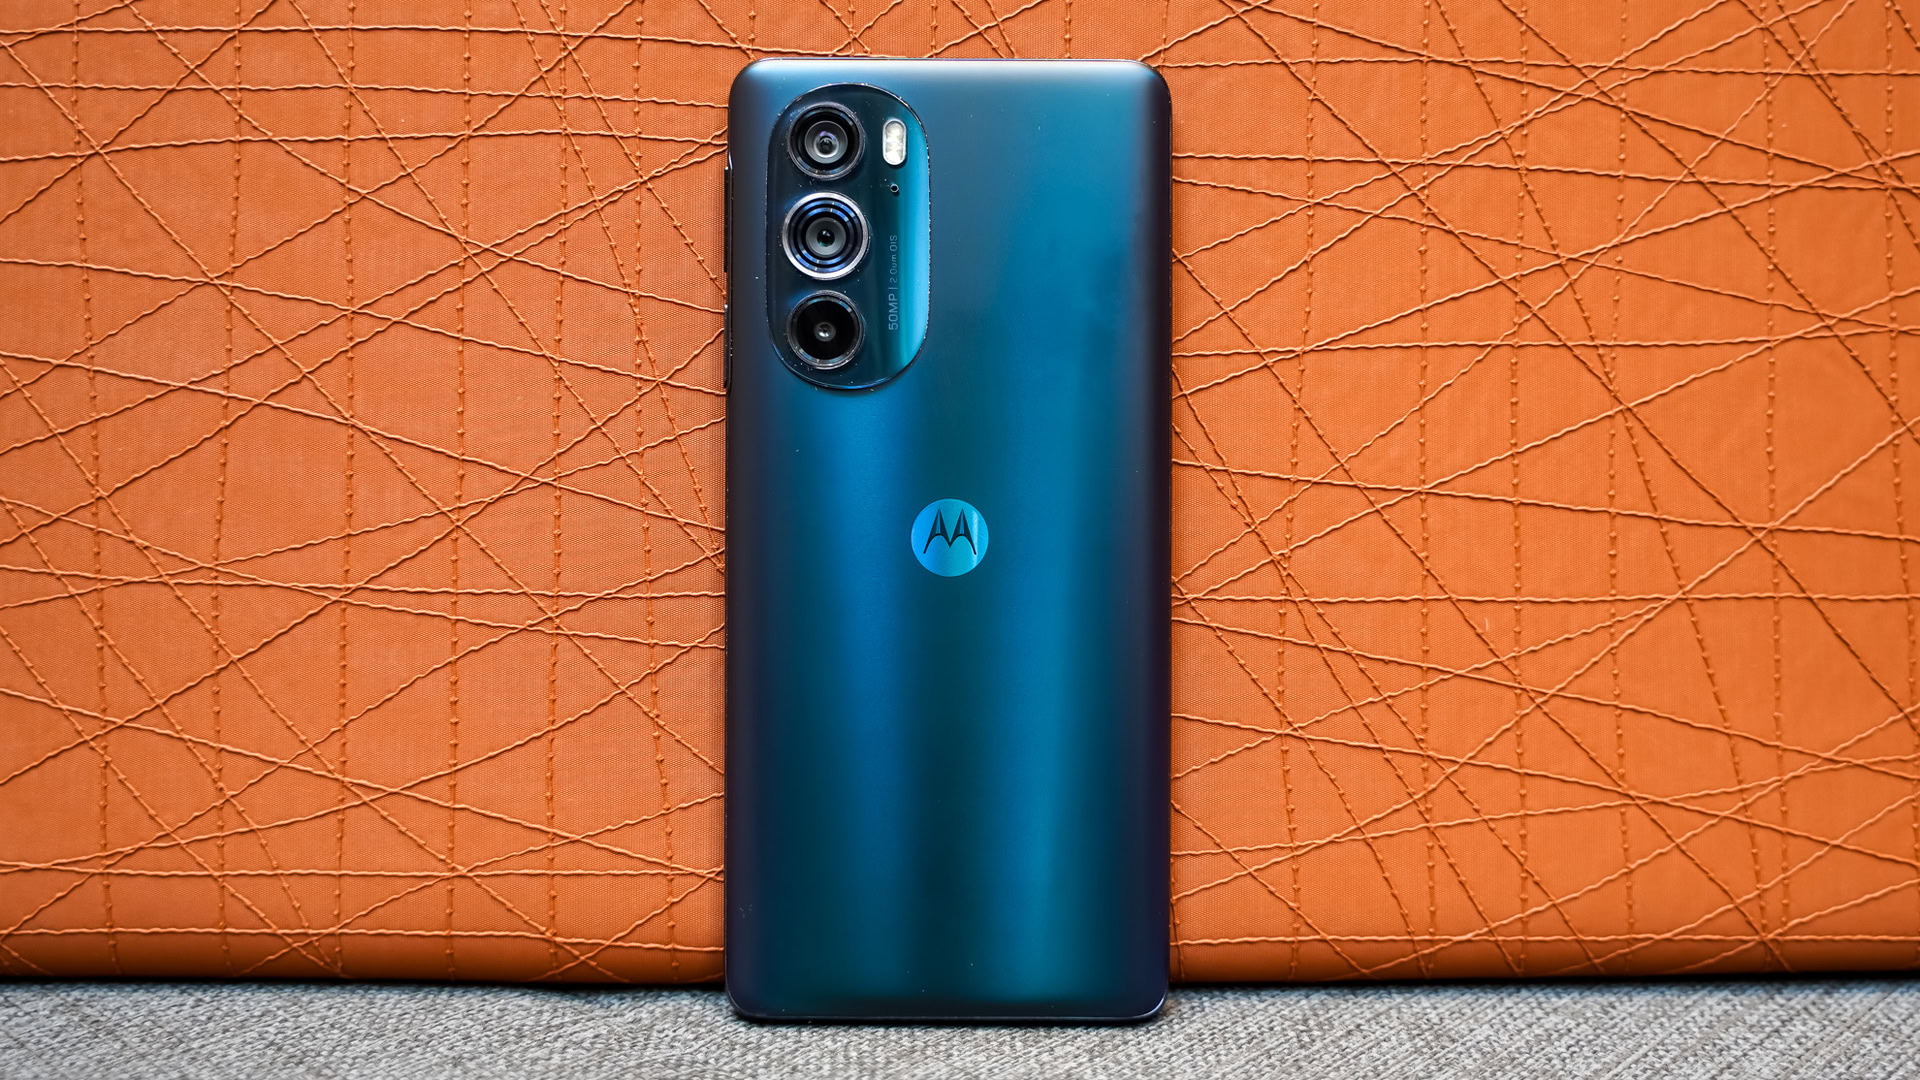 https://www.androidauthority.com/wp-content/uploads/2022/03/Motorola-Edge-Plus-2022-rear-centered-on-couch.jpg